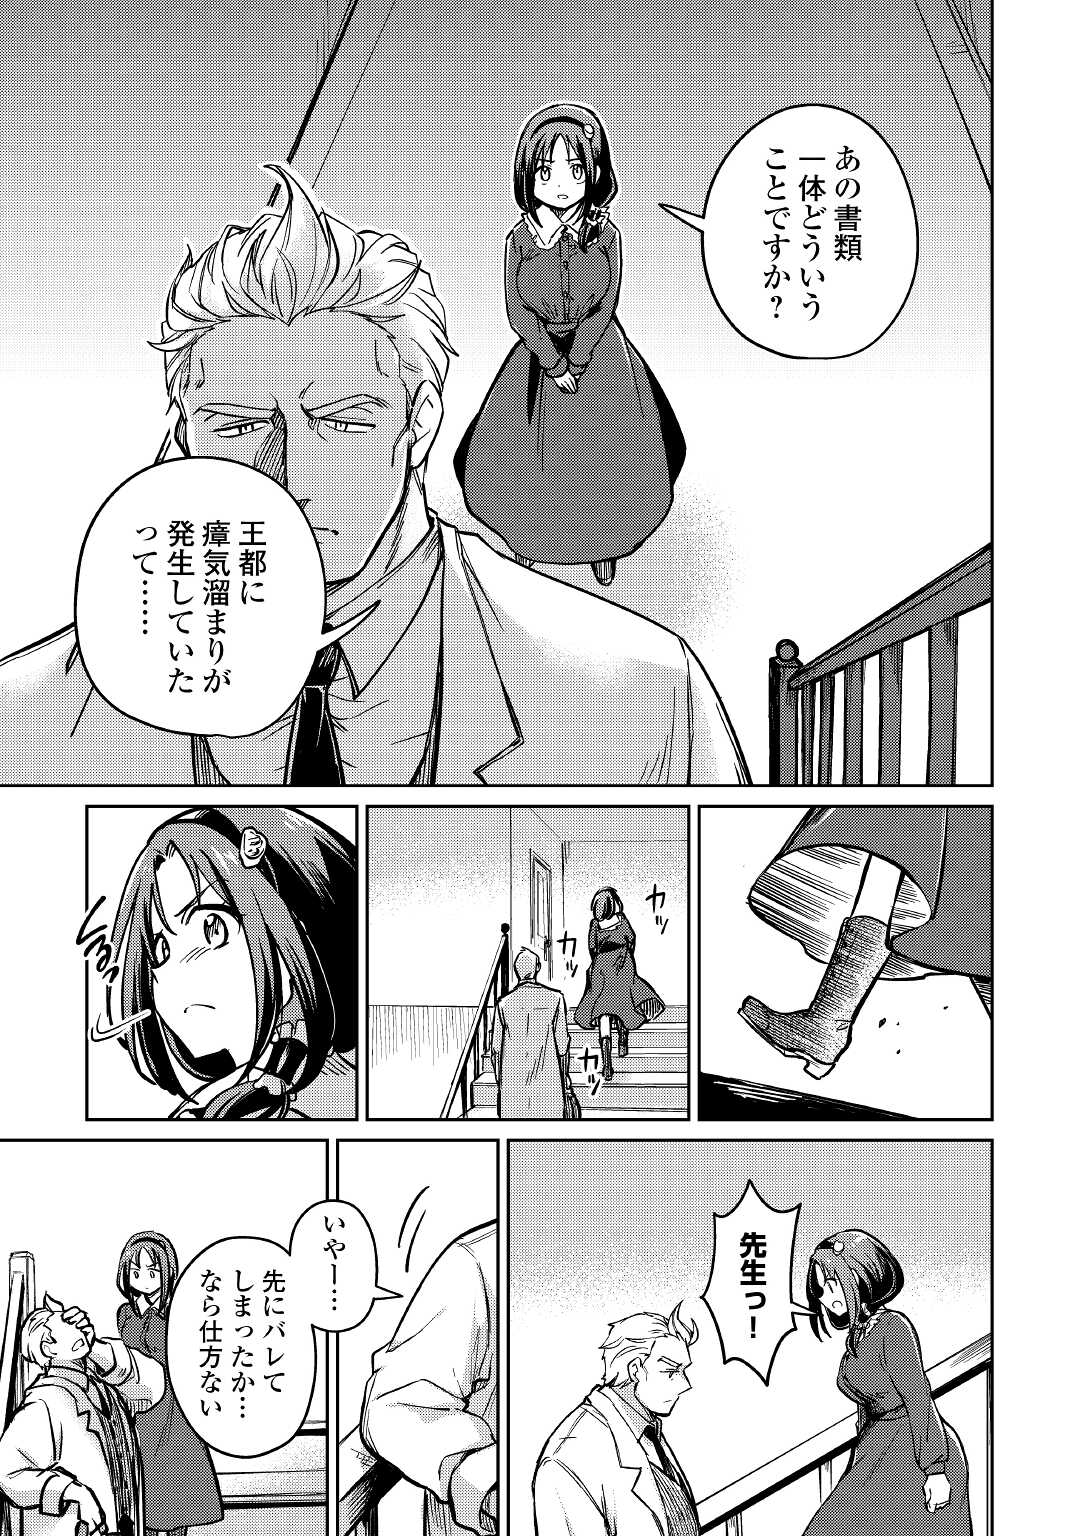 The Former Structural Researcher’s Story of Otherworldly Adventure 第35話 - Page 31